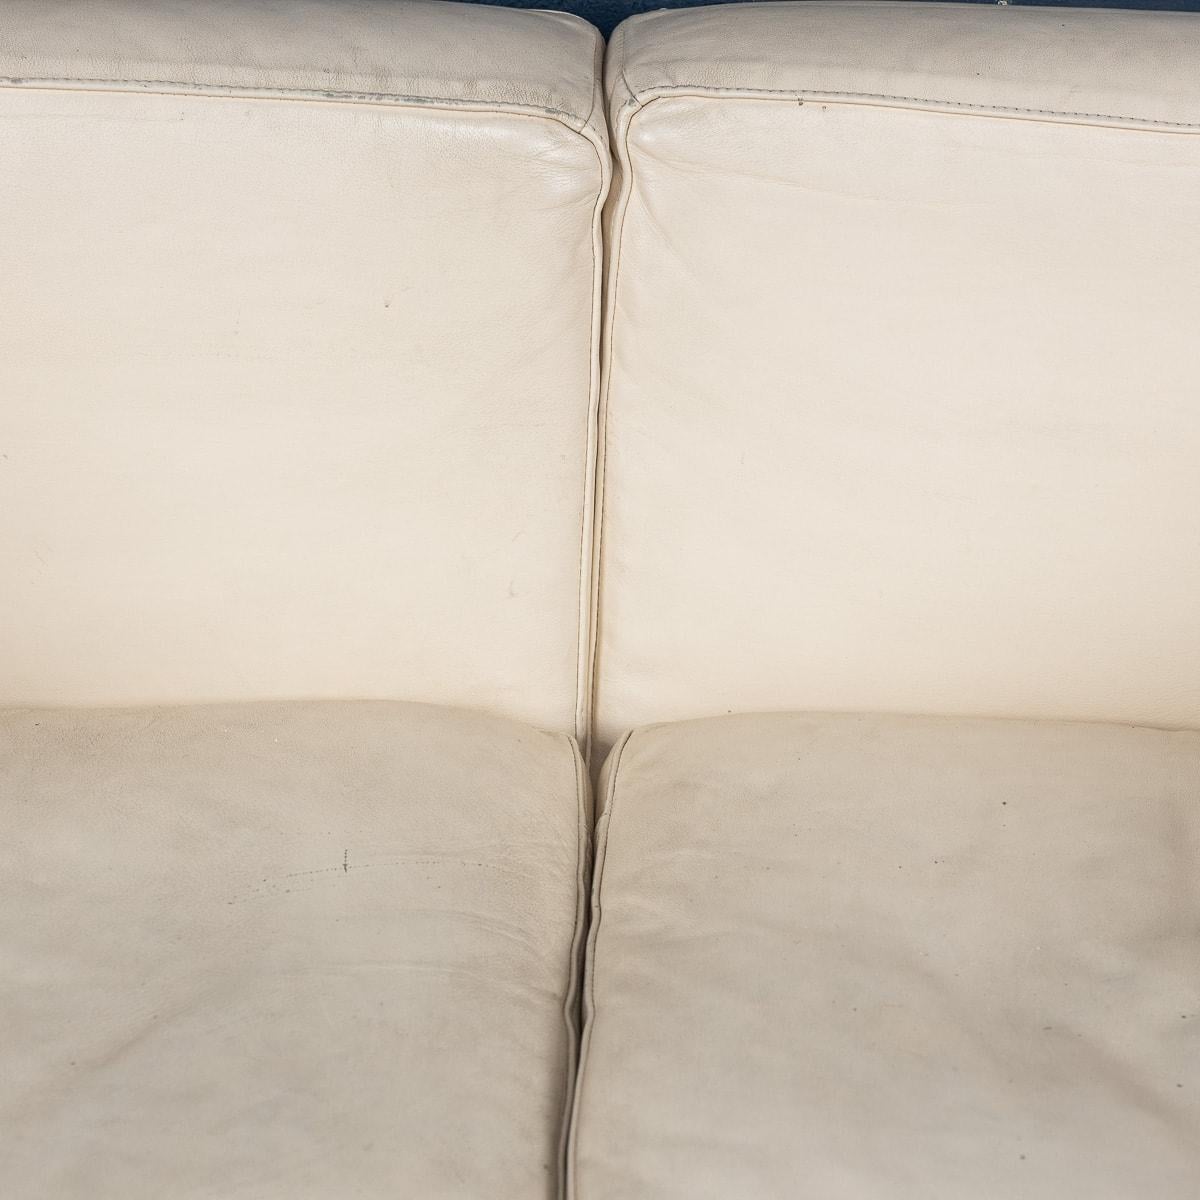 20th Century Leather Sofa In The Manner Of Le Corbusier, Italy c.1980 For Sale 4